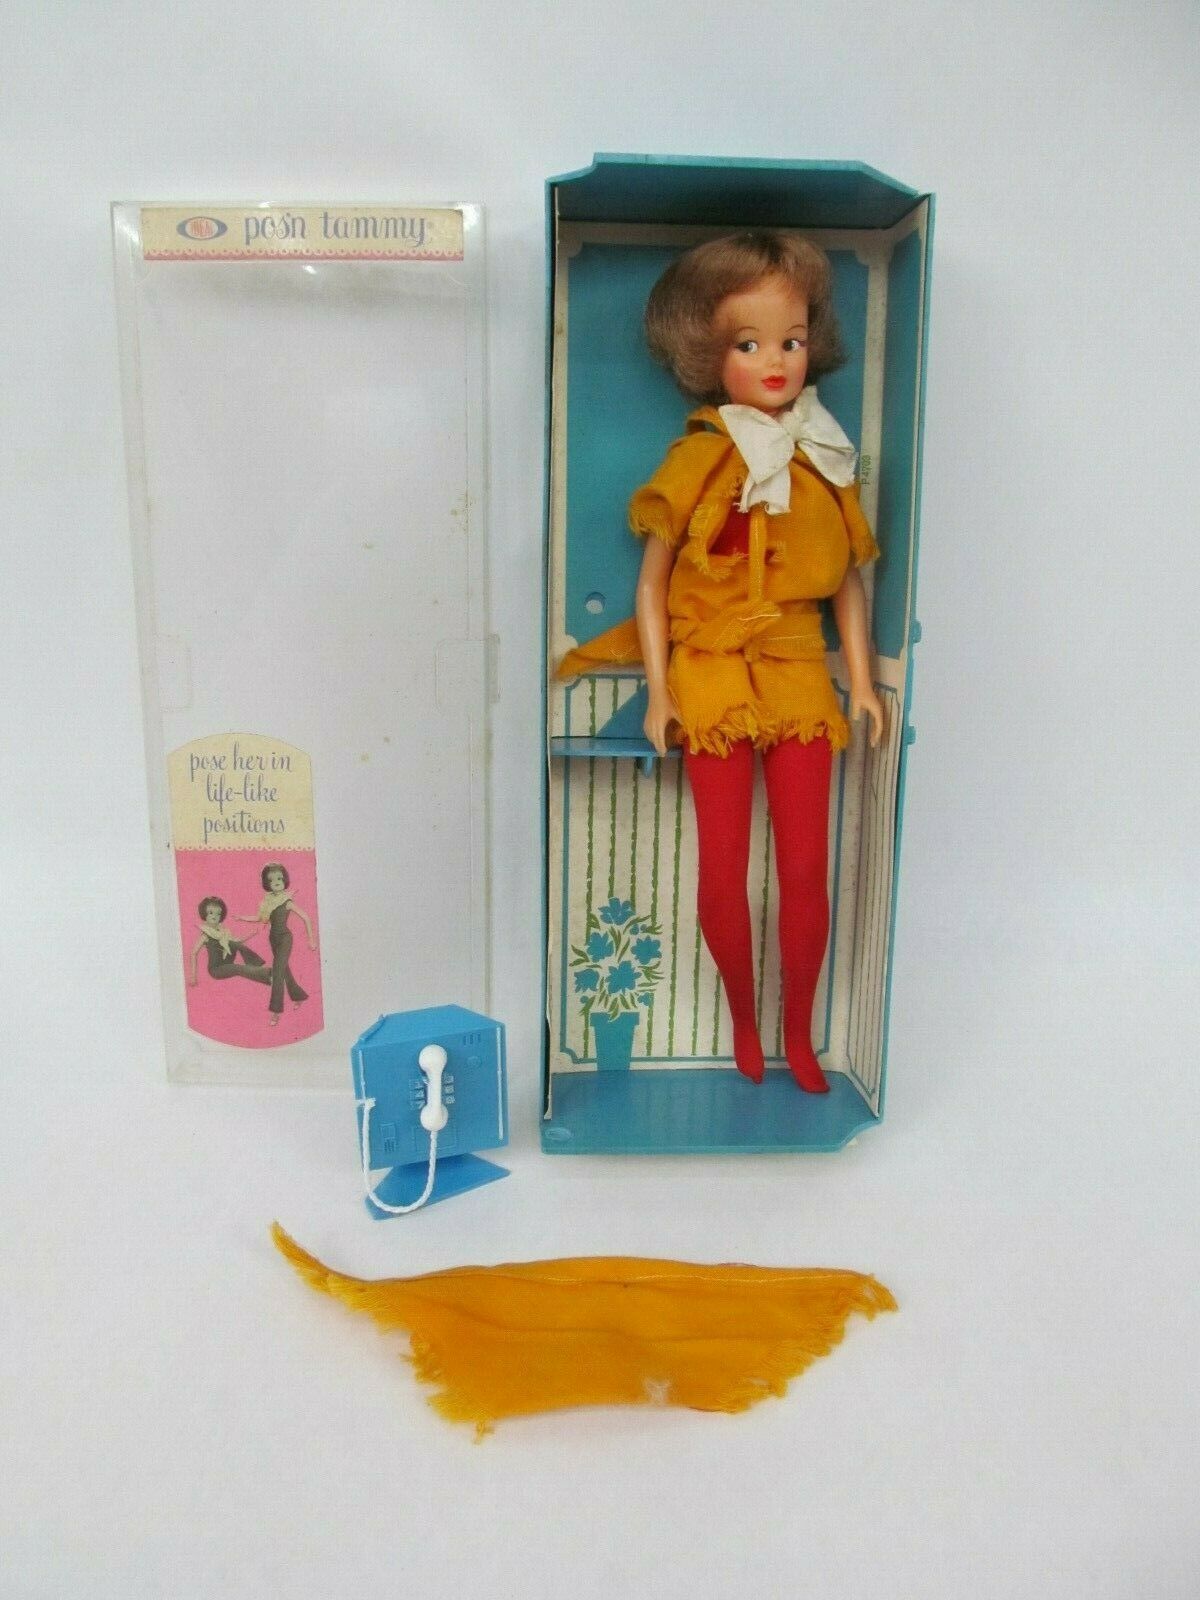 Vintage Pos’n Tammy Telephone Booth Playset And Doll